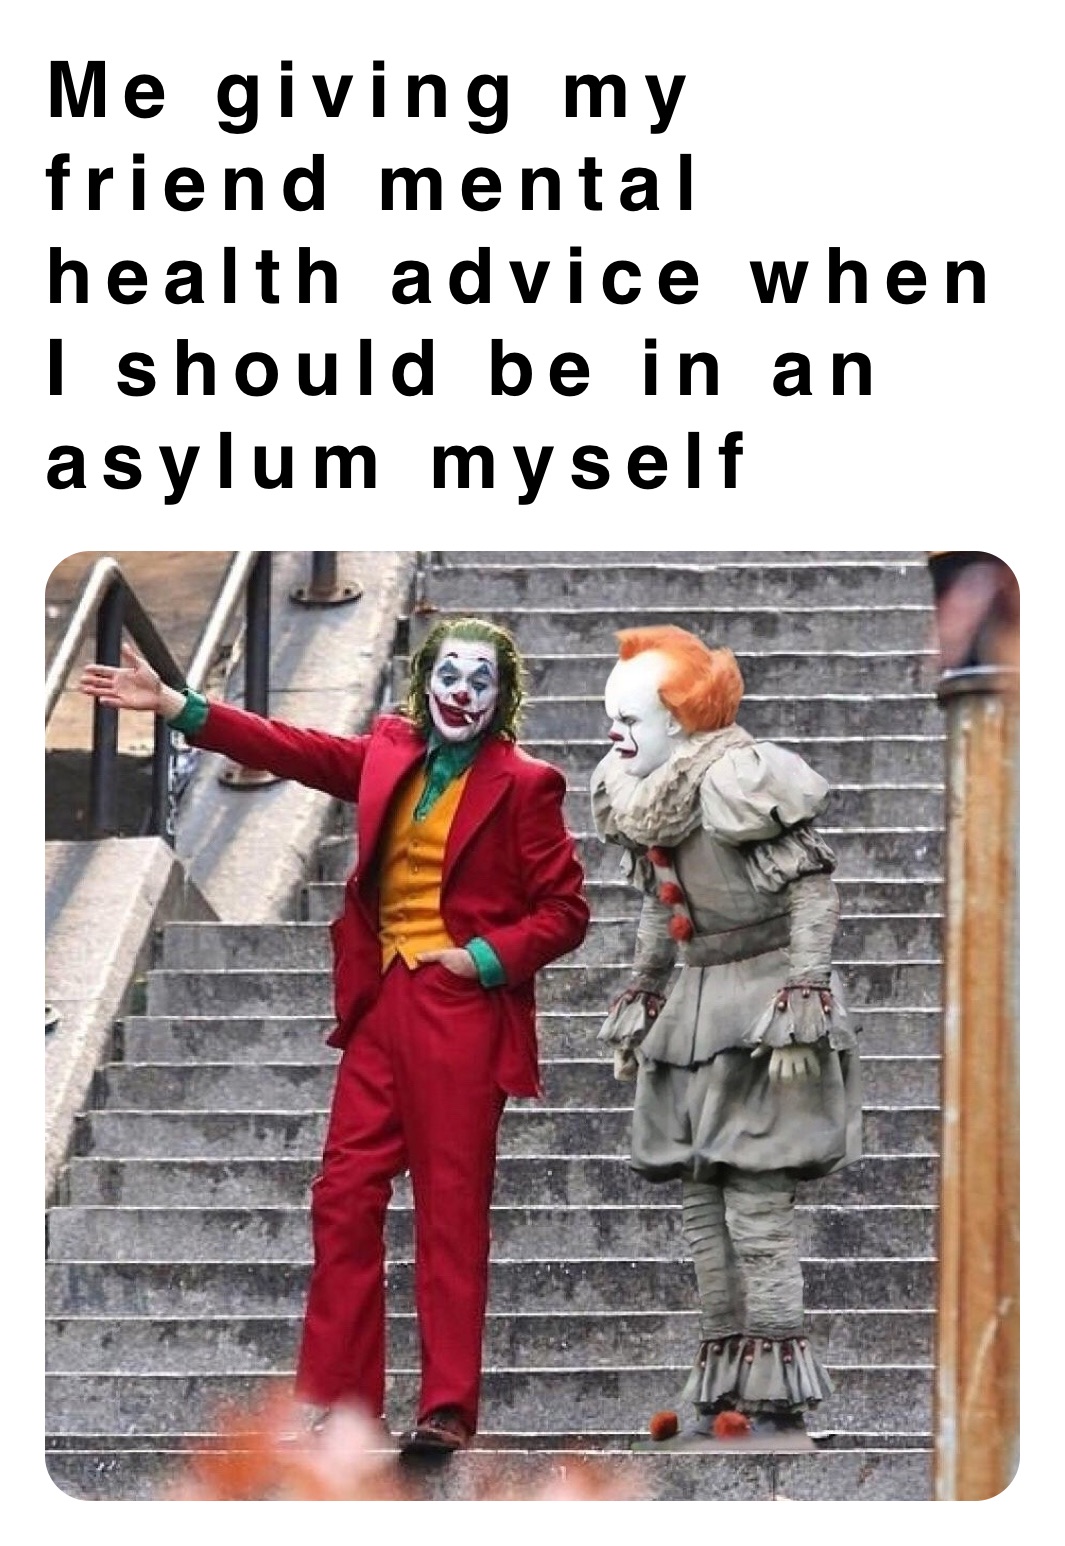 Me giving my friend mental health advice when I should be in an asylum myself